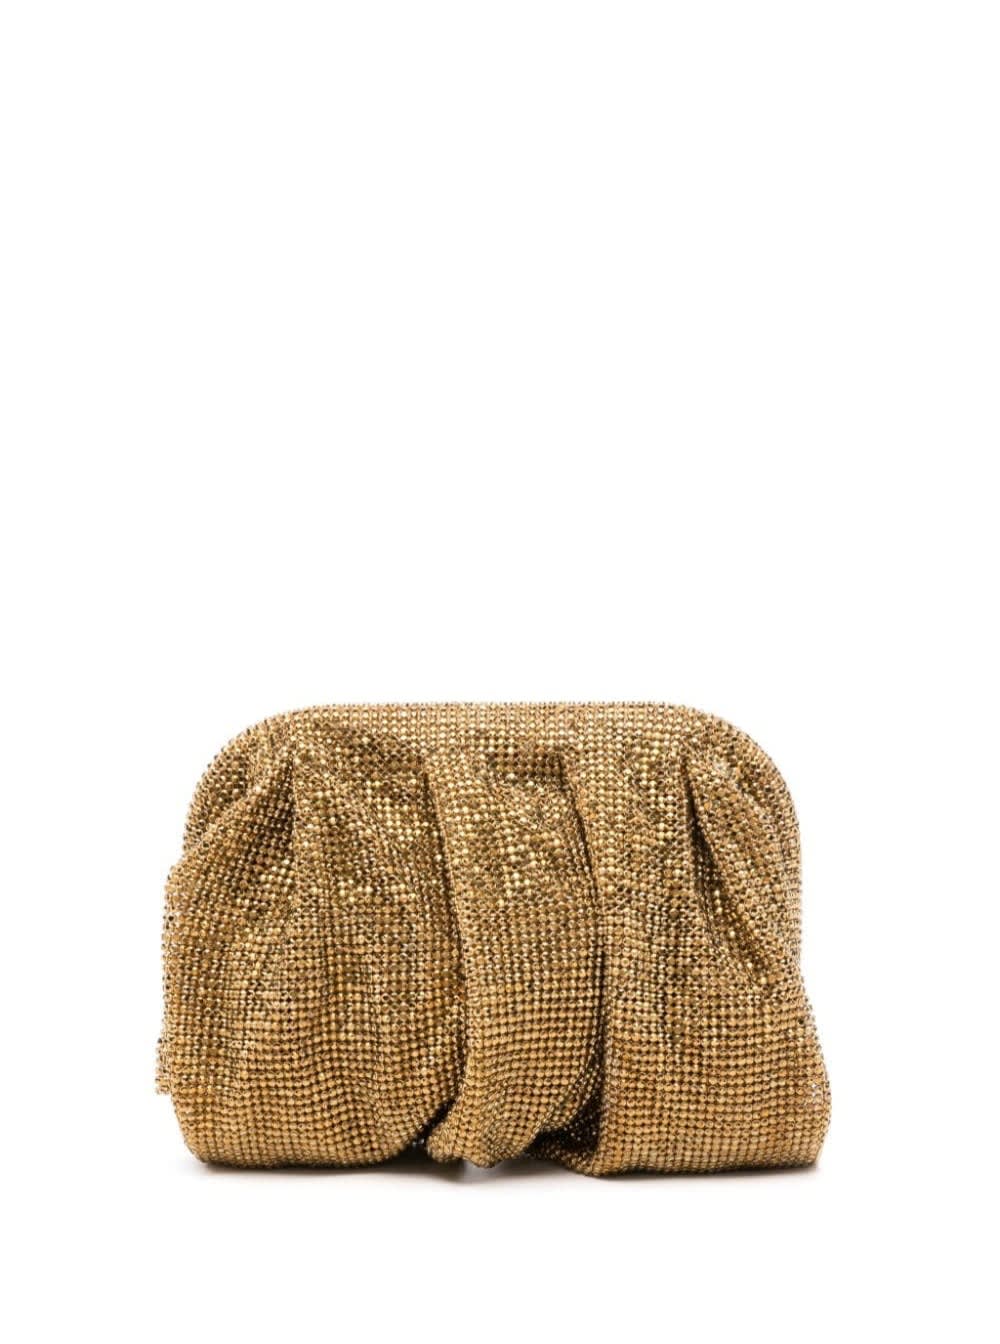 venus La Petite Gold Clutch Bag In Fabric With Allover Crystals Woman